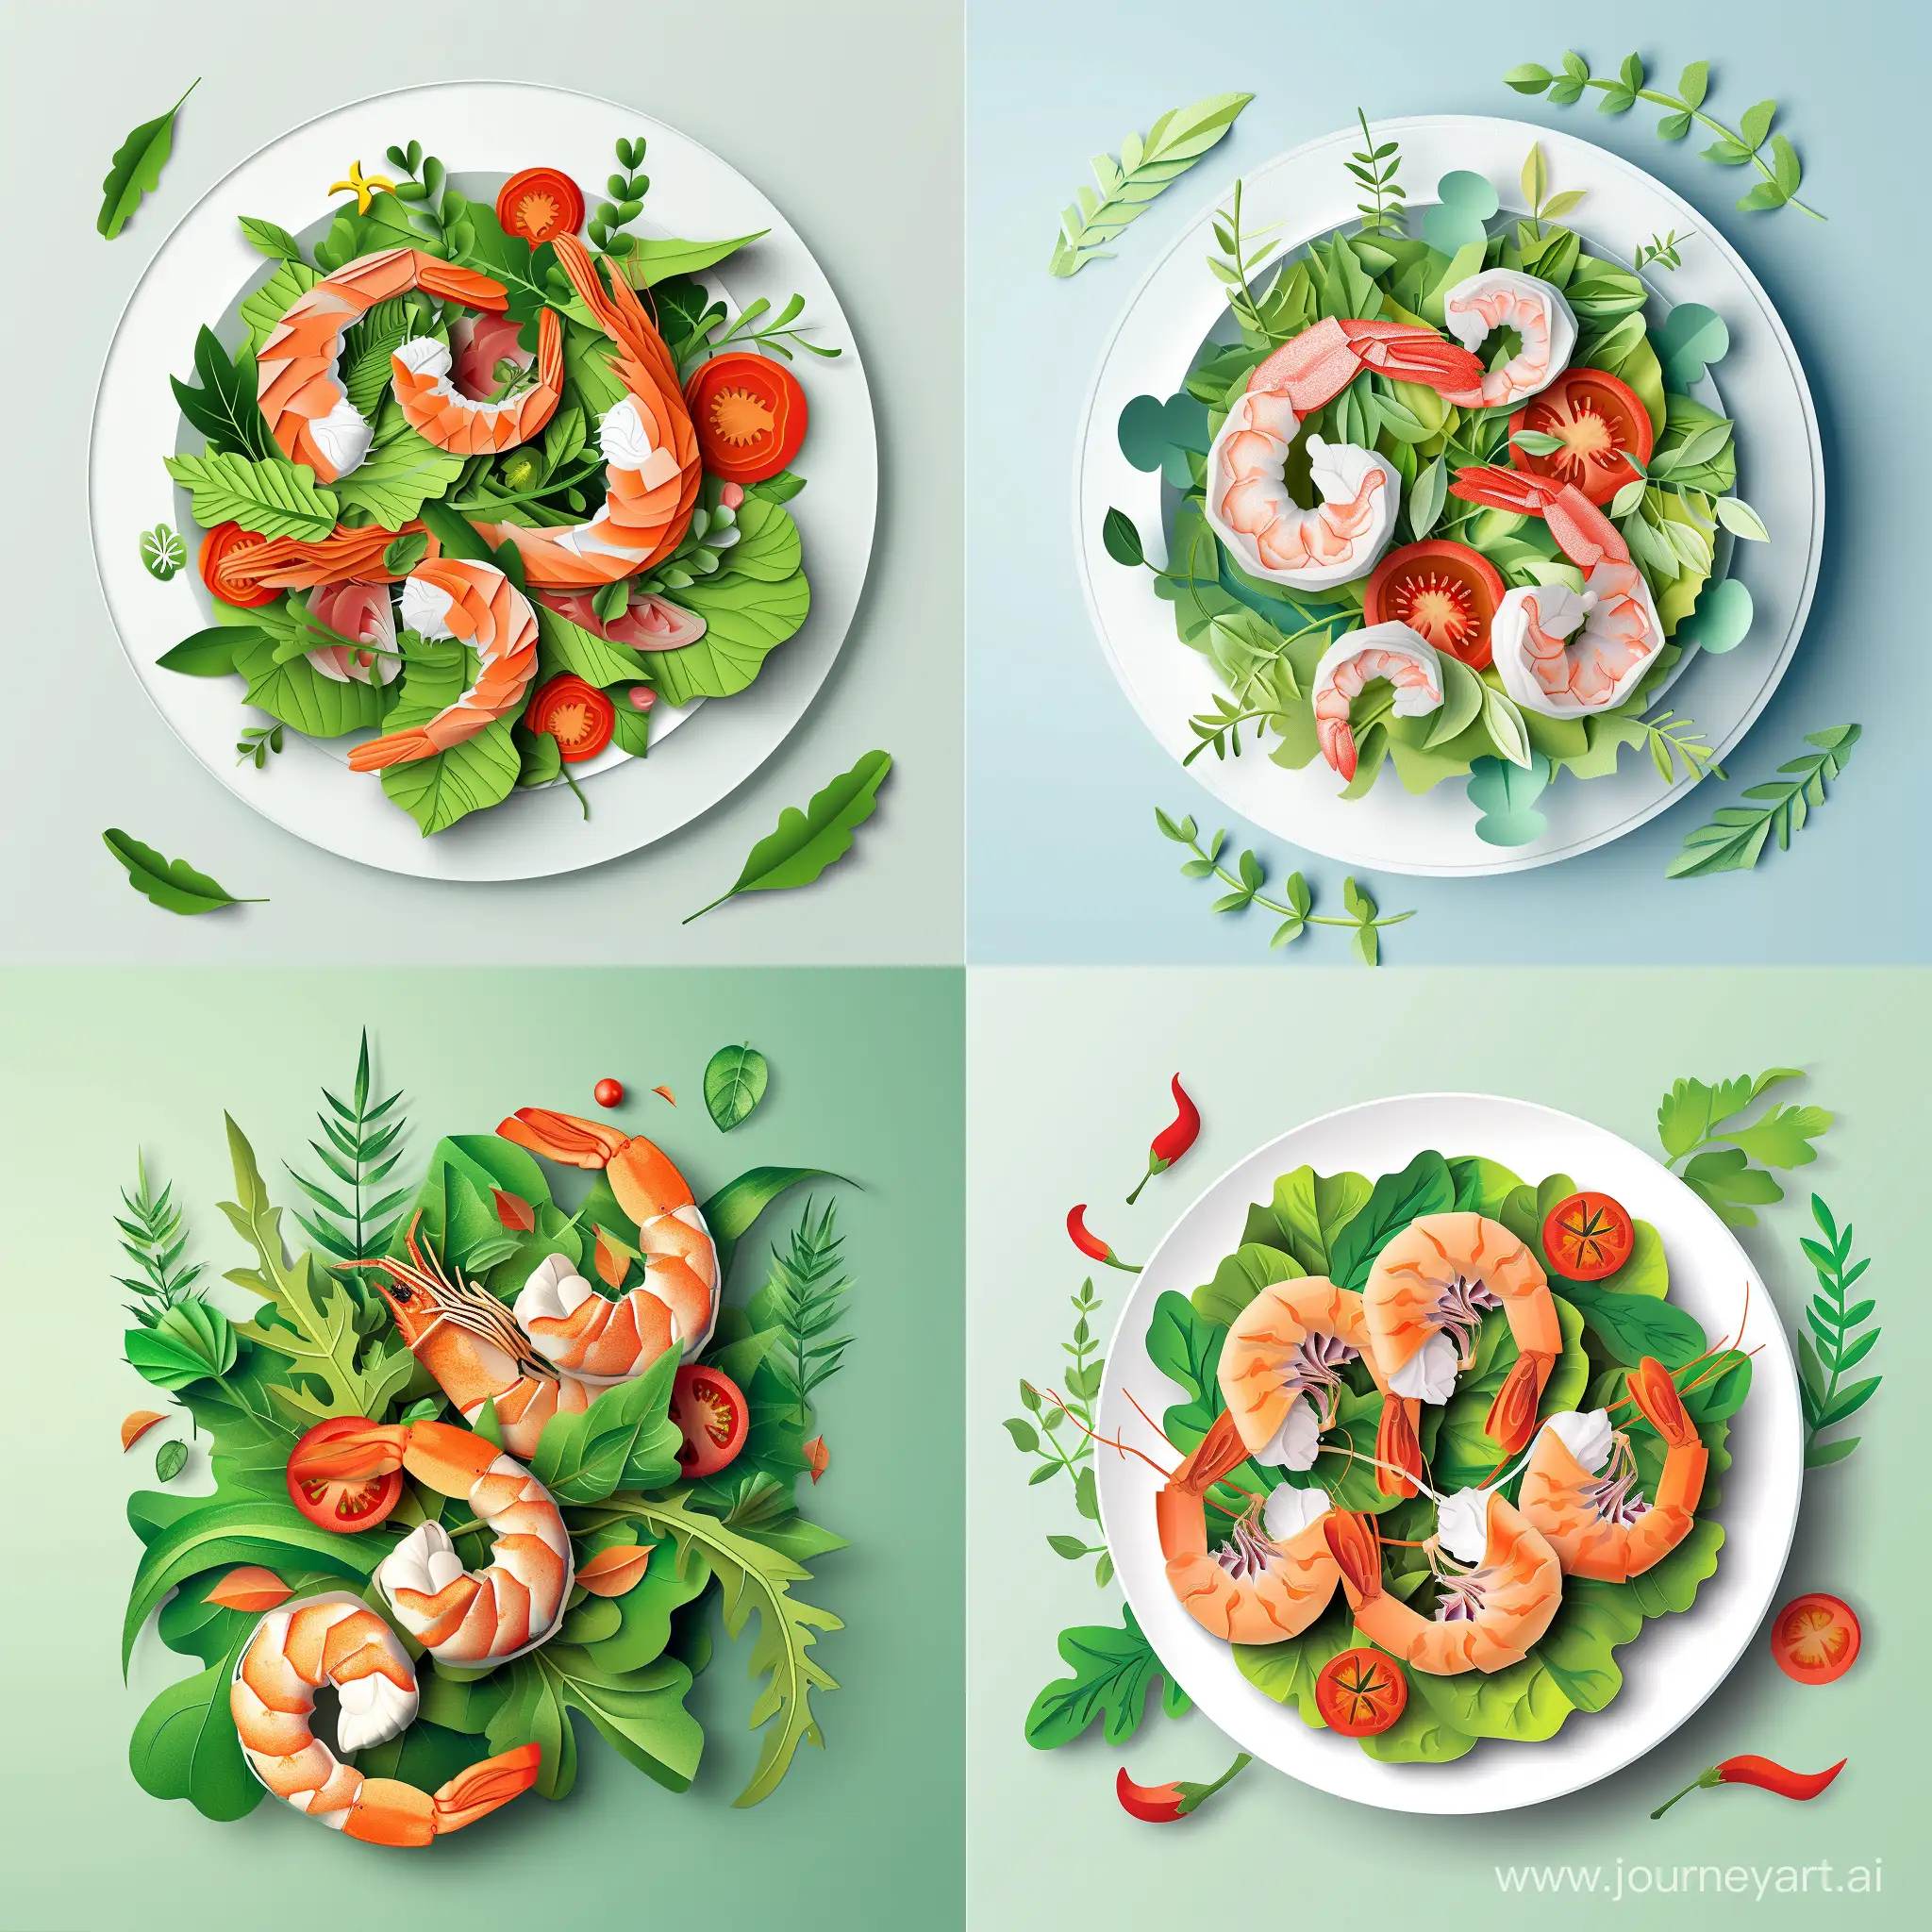 cut paper art of salad with shrimp and tomato, high quality details, in vector style